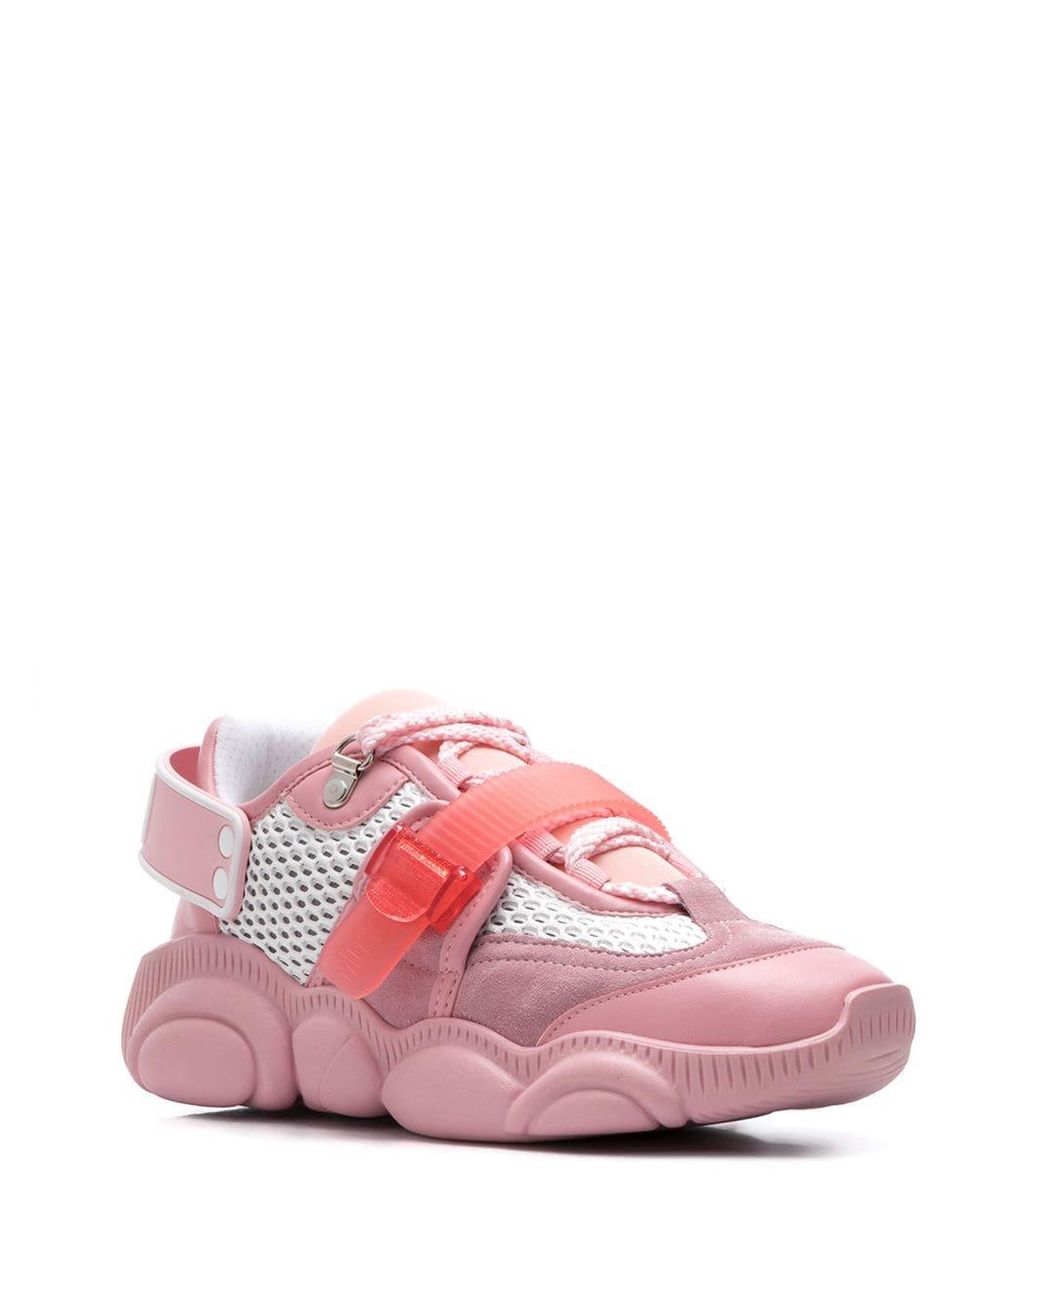 Moschino Teddy Sneakers in Pink | Lyst